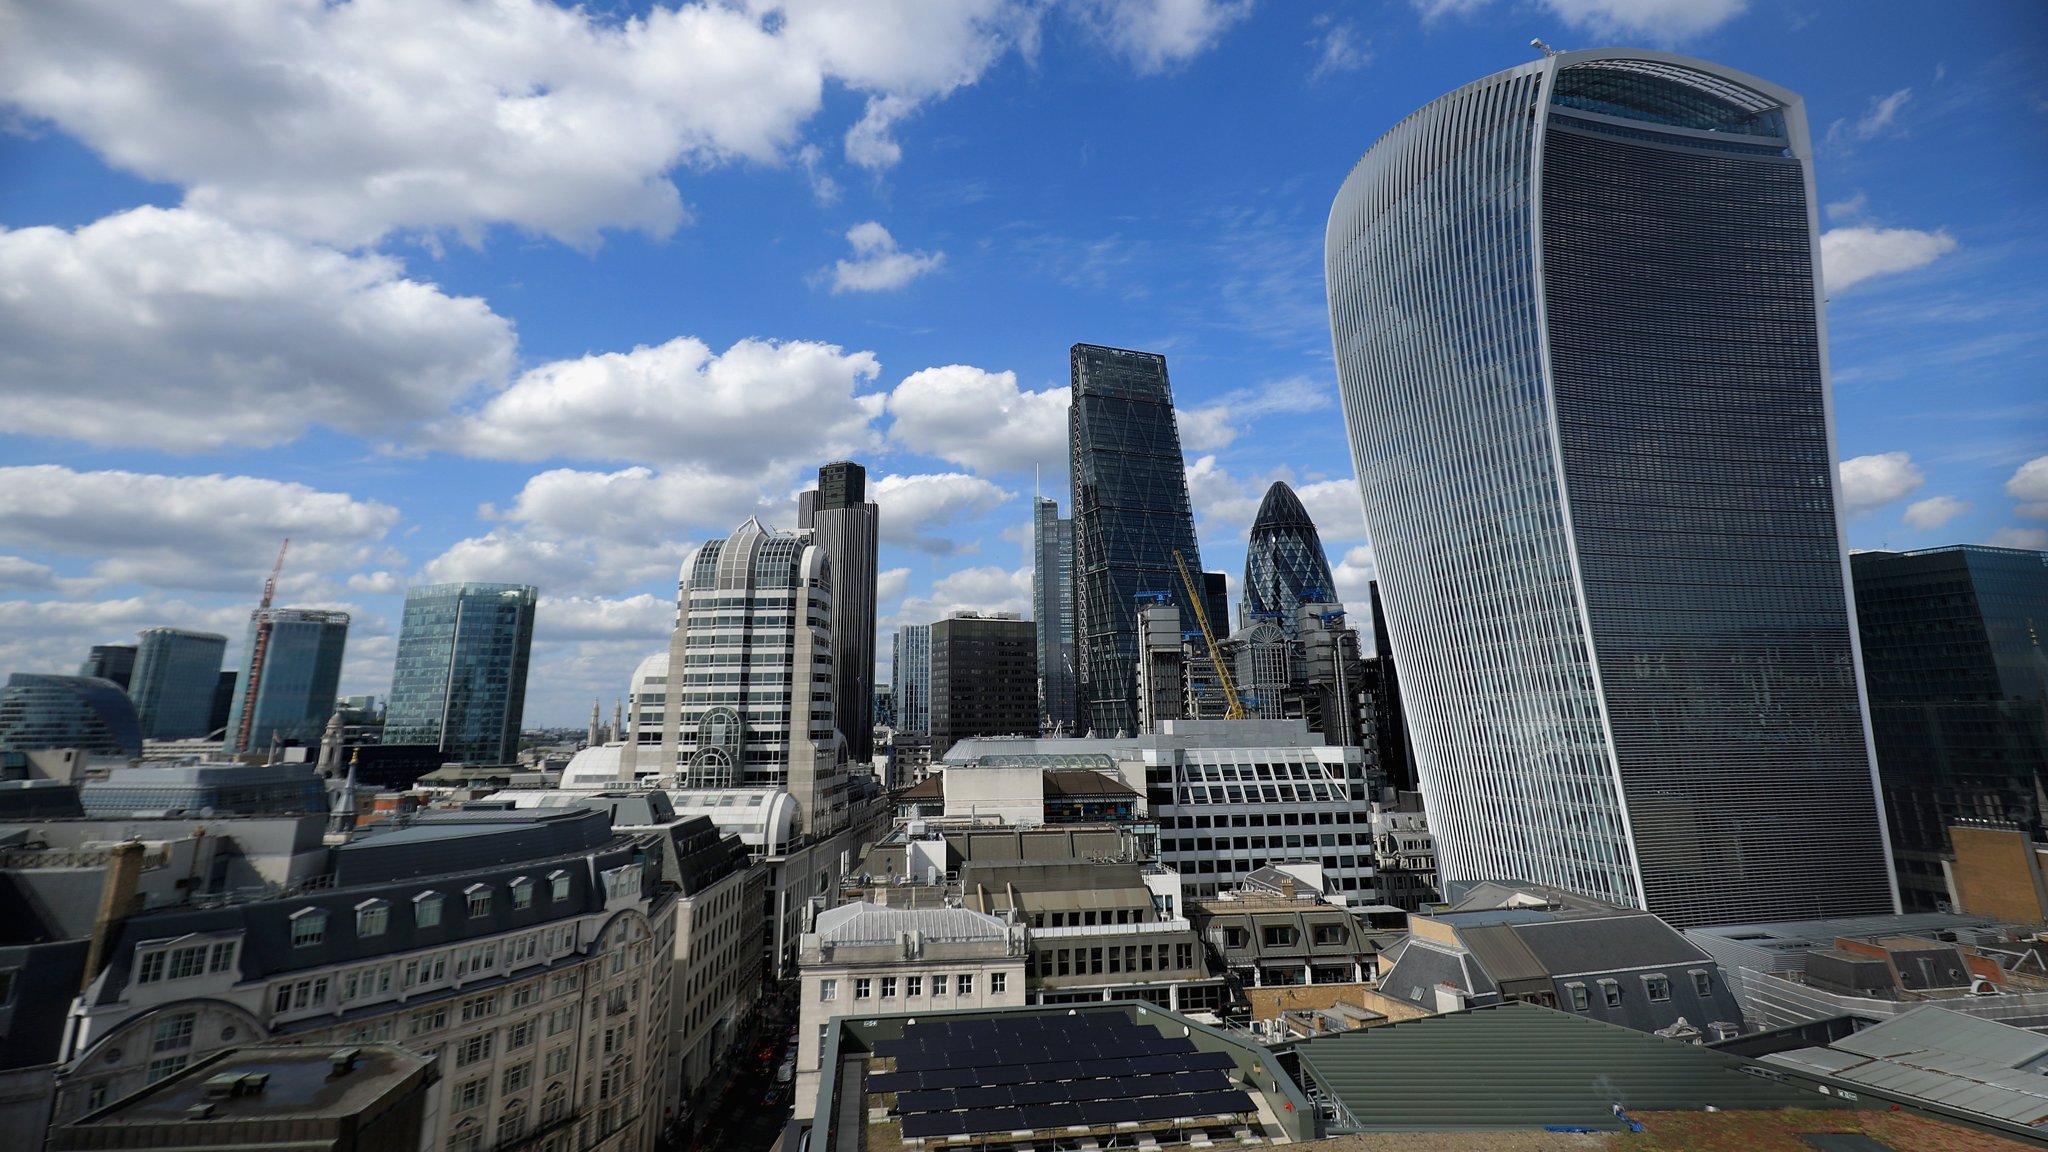 City of London planners eye expansion of skyscraper cluster ...